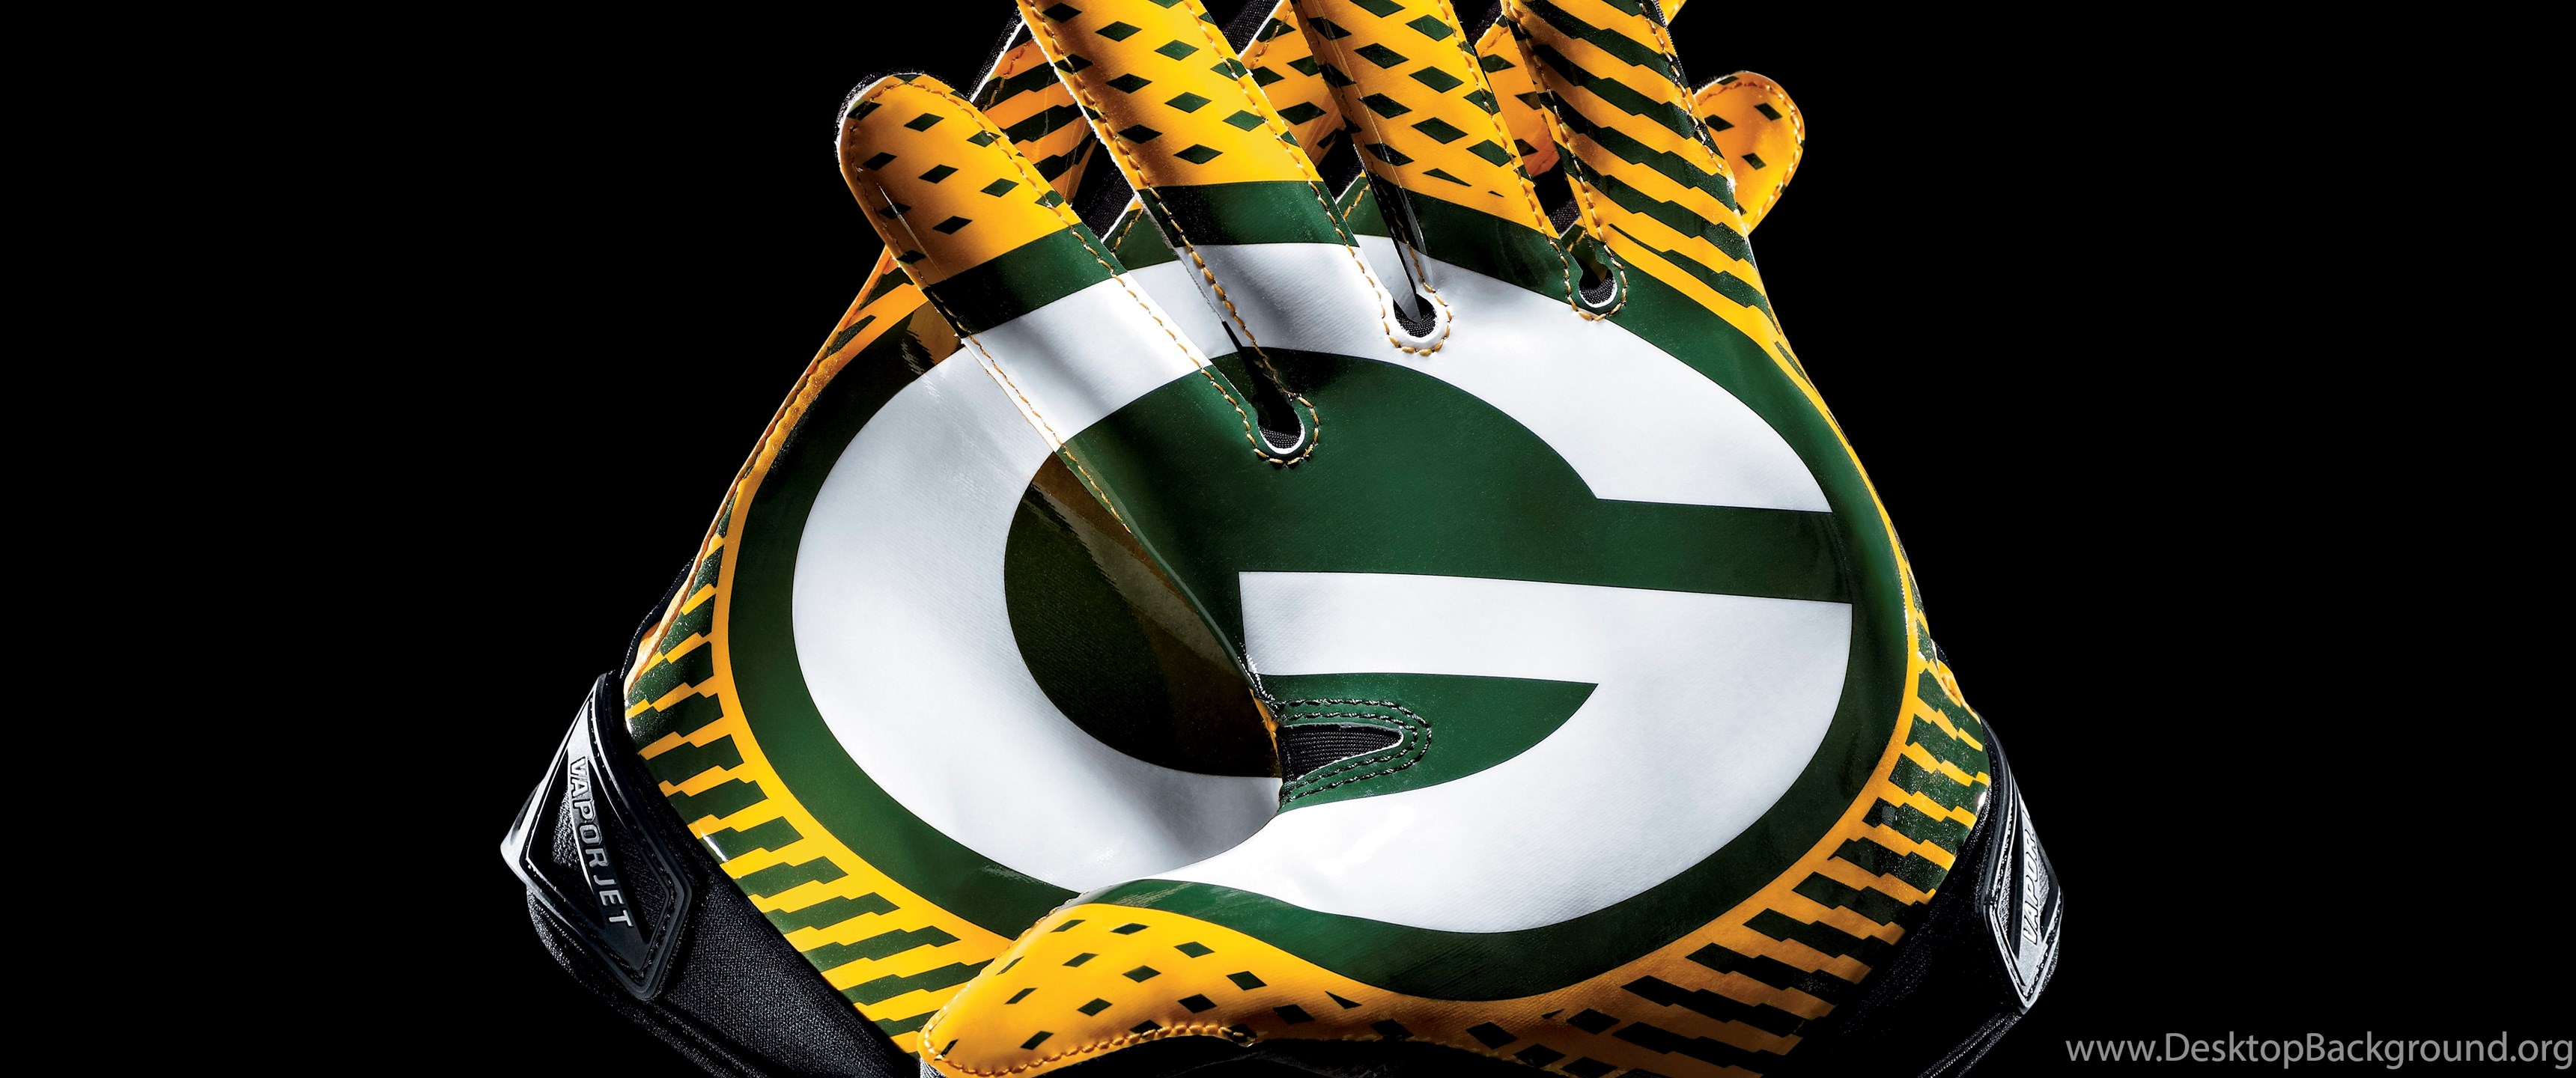 Download HD Packers Wallpapers And Photos Widescreen Wide 21:9 3440x1440 De...